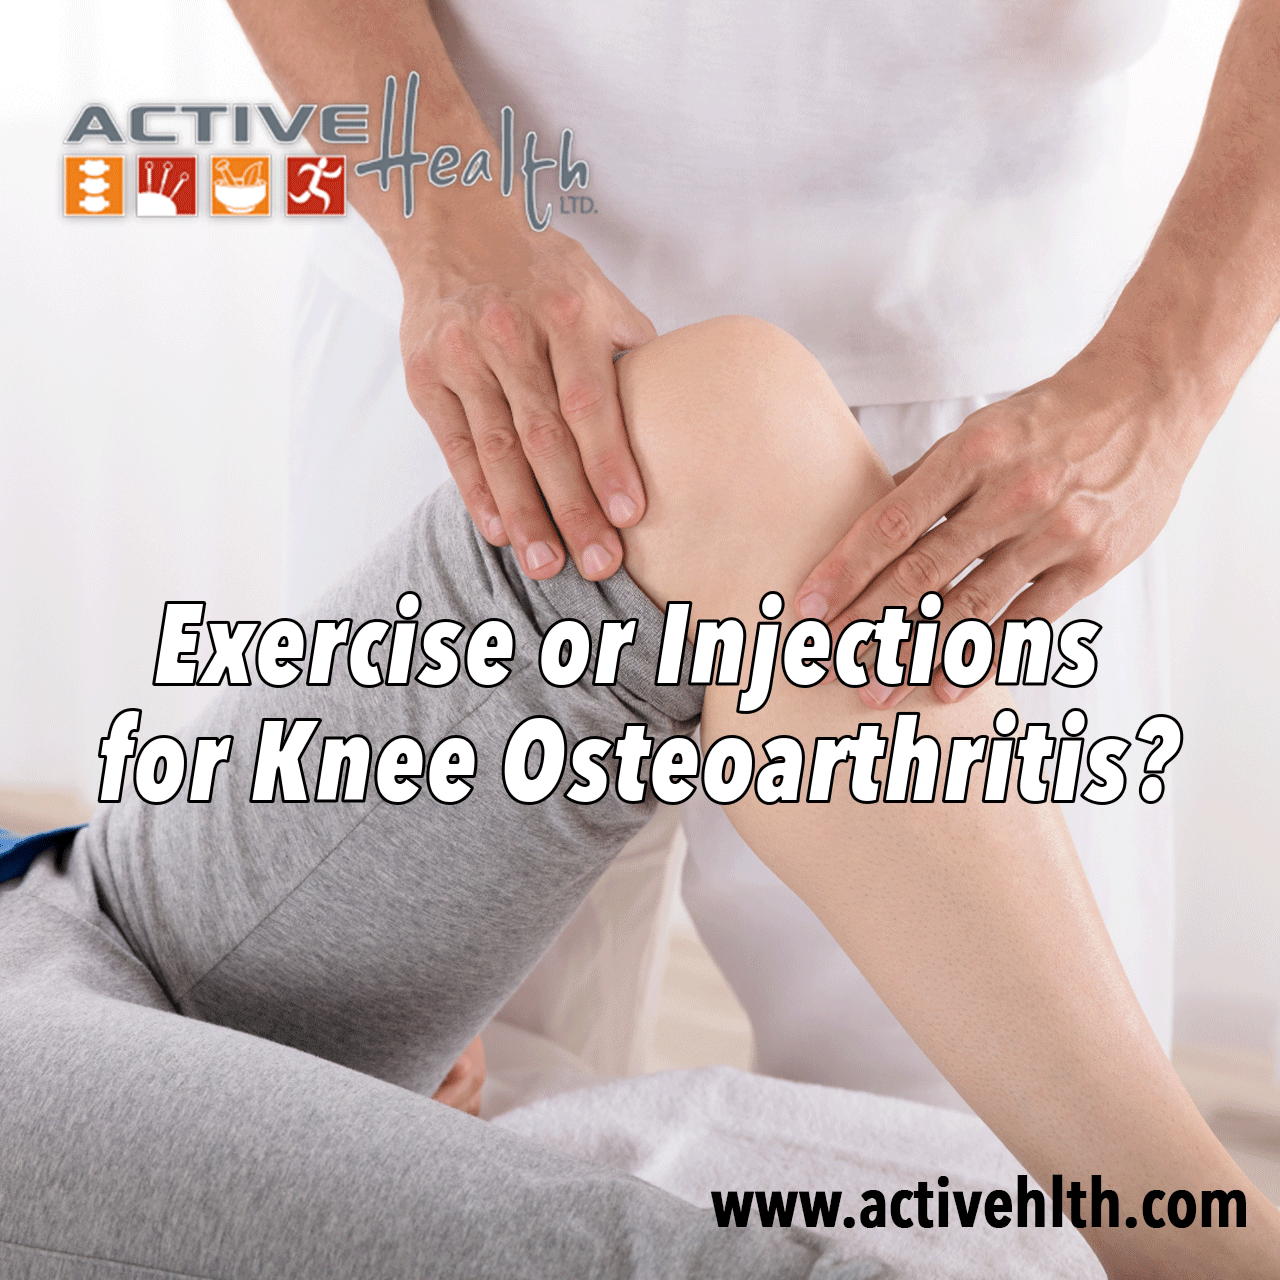 Exercise or Injections for Knee Osteoarthritis?